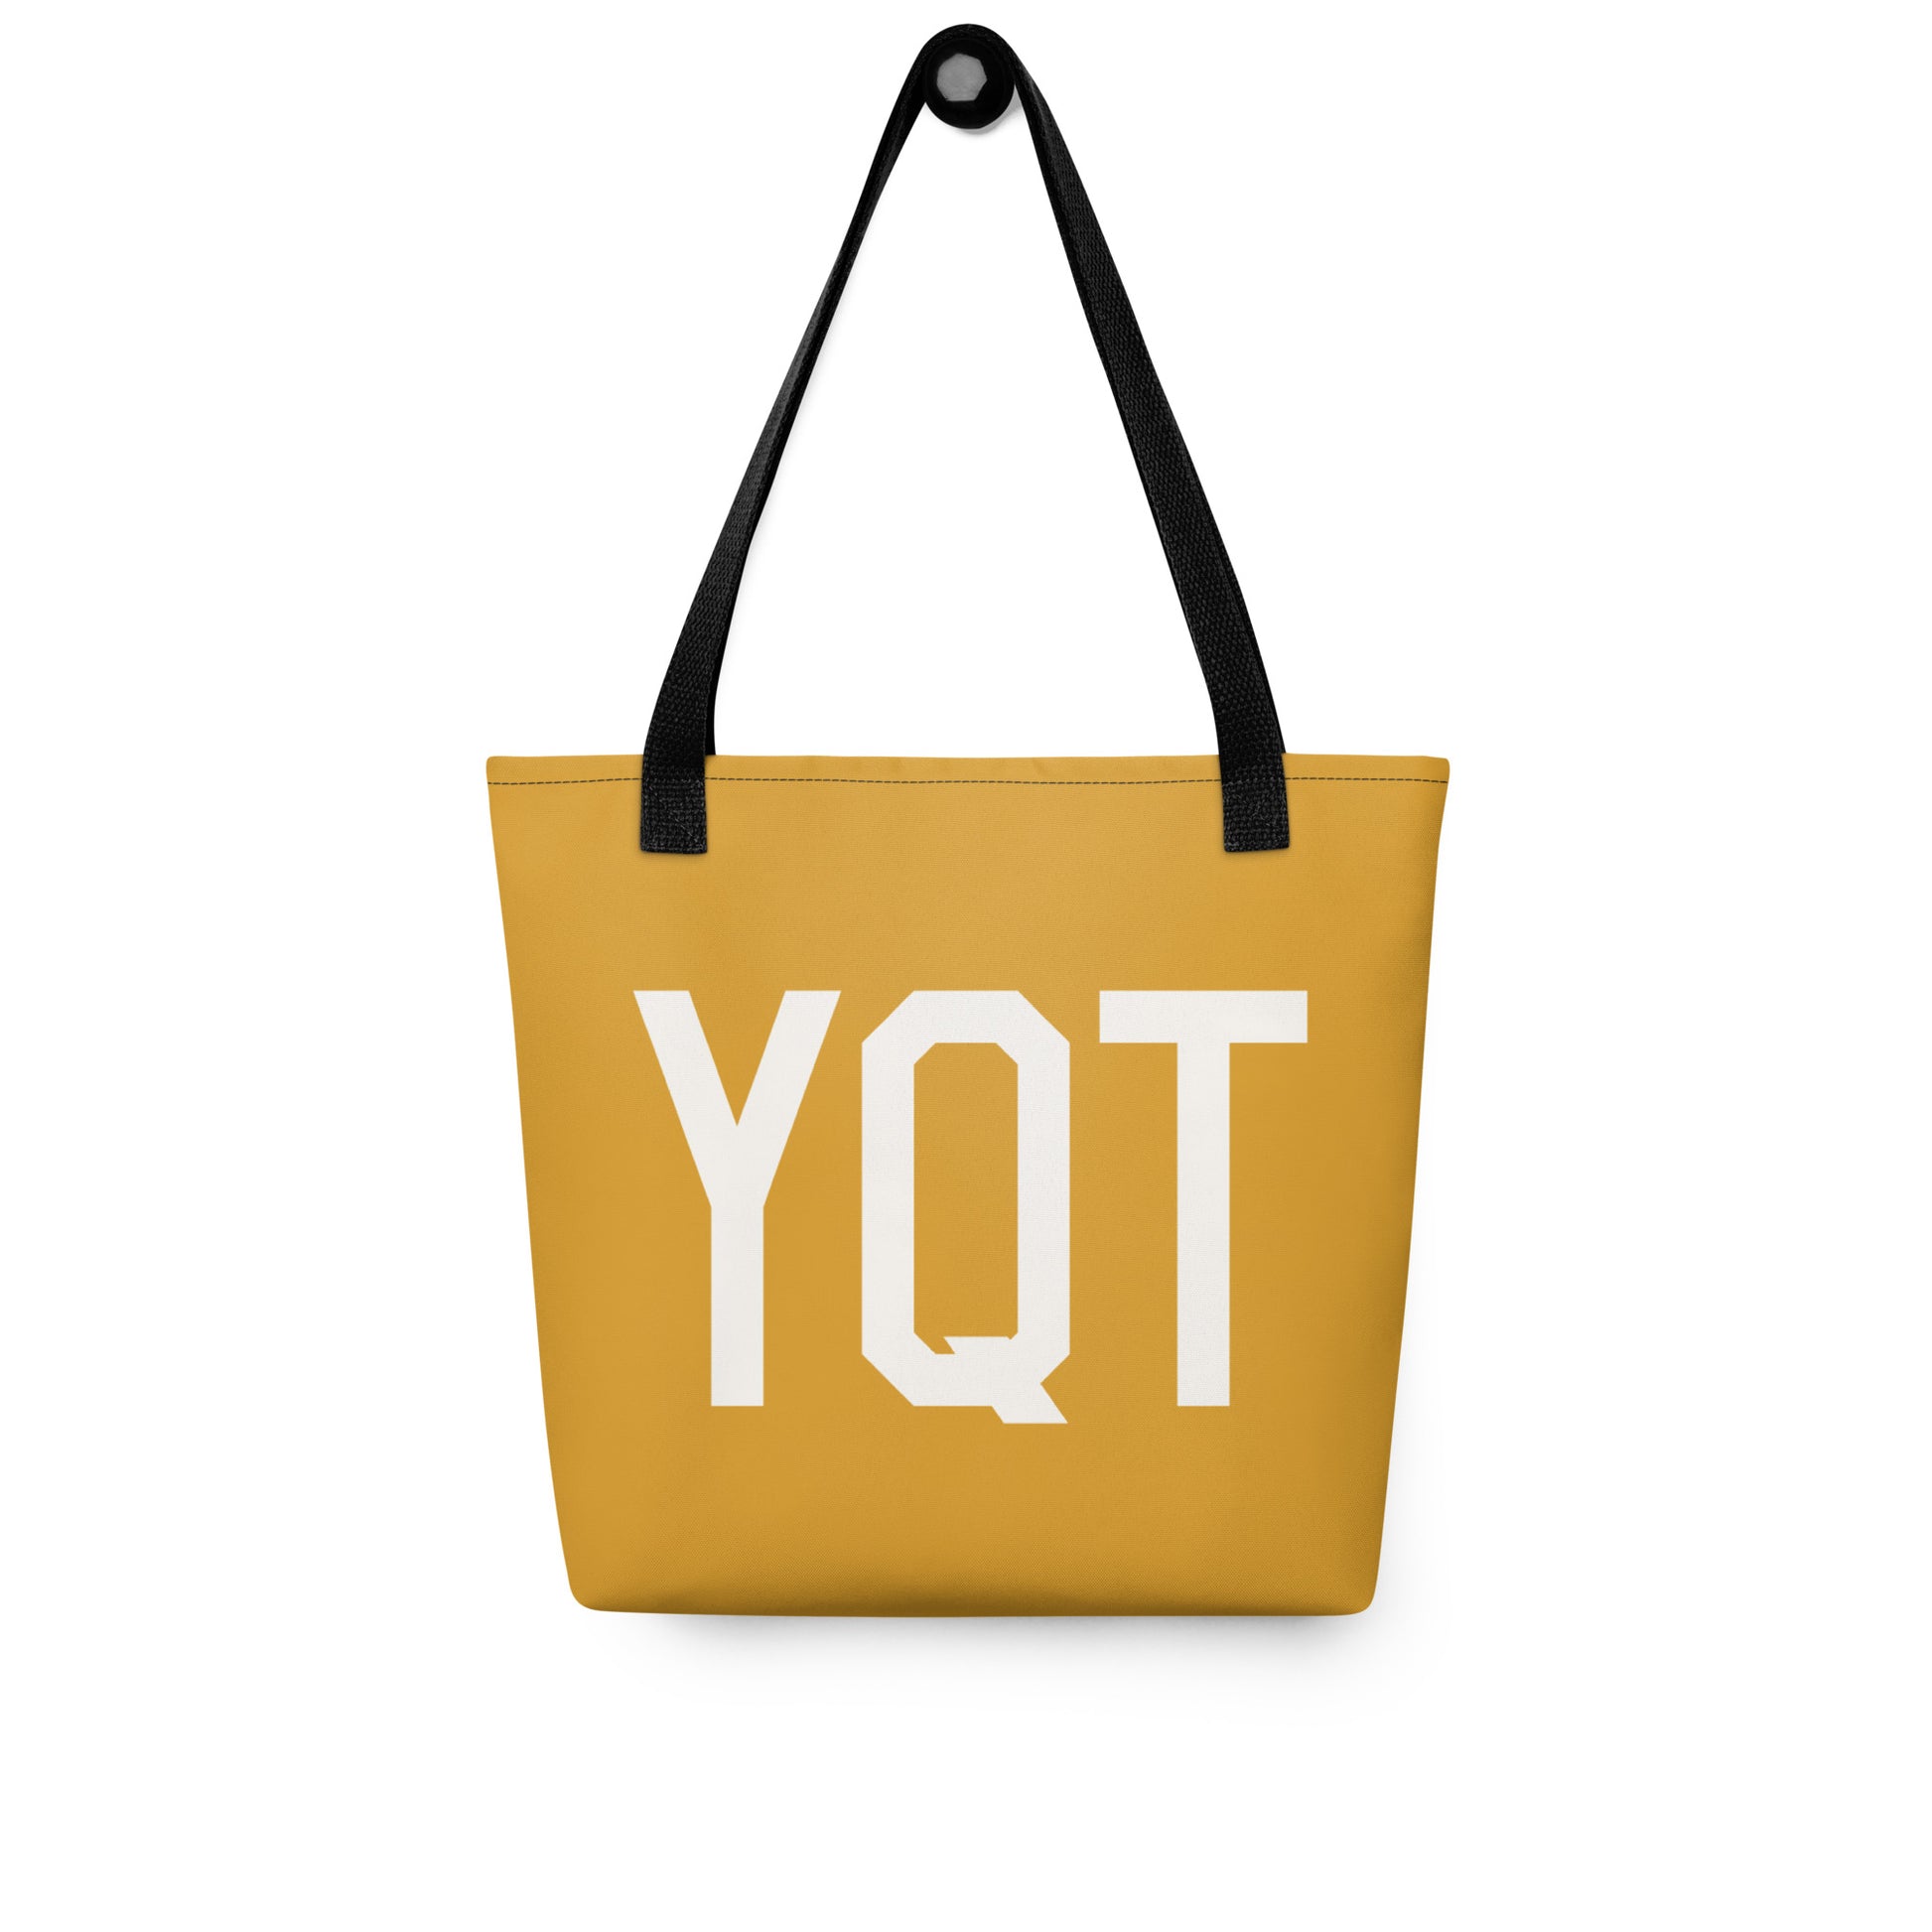 Aviation Gift Tote Bag - Buttercup • YQT Thunder Bay • YHM Designs - Image 03